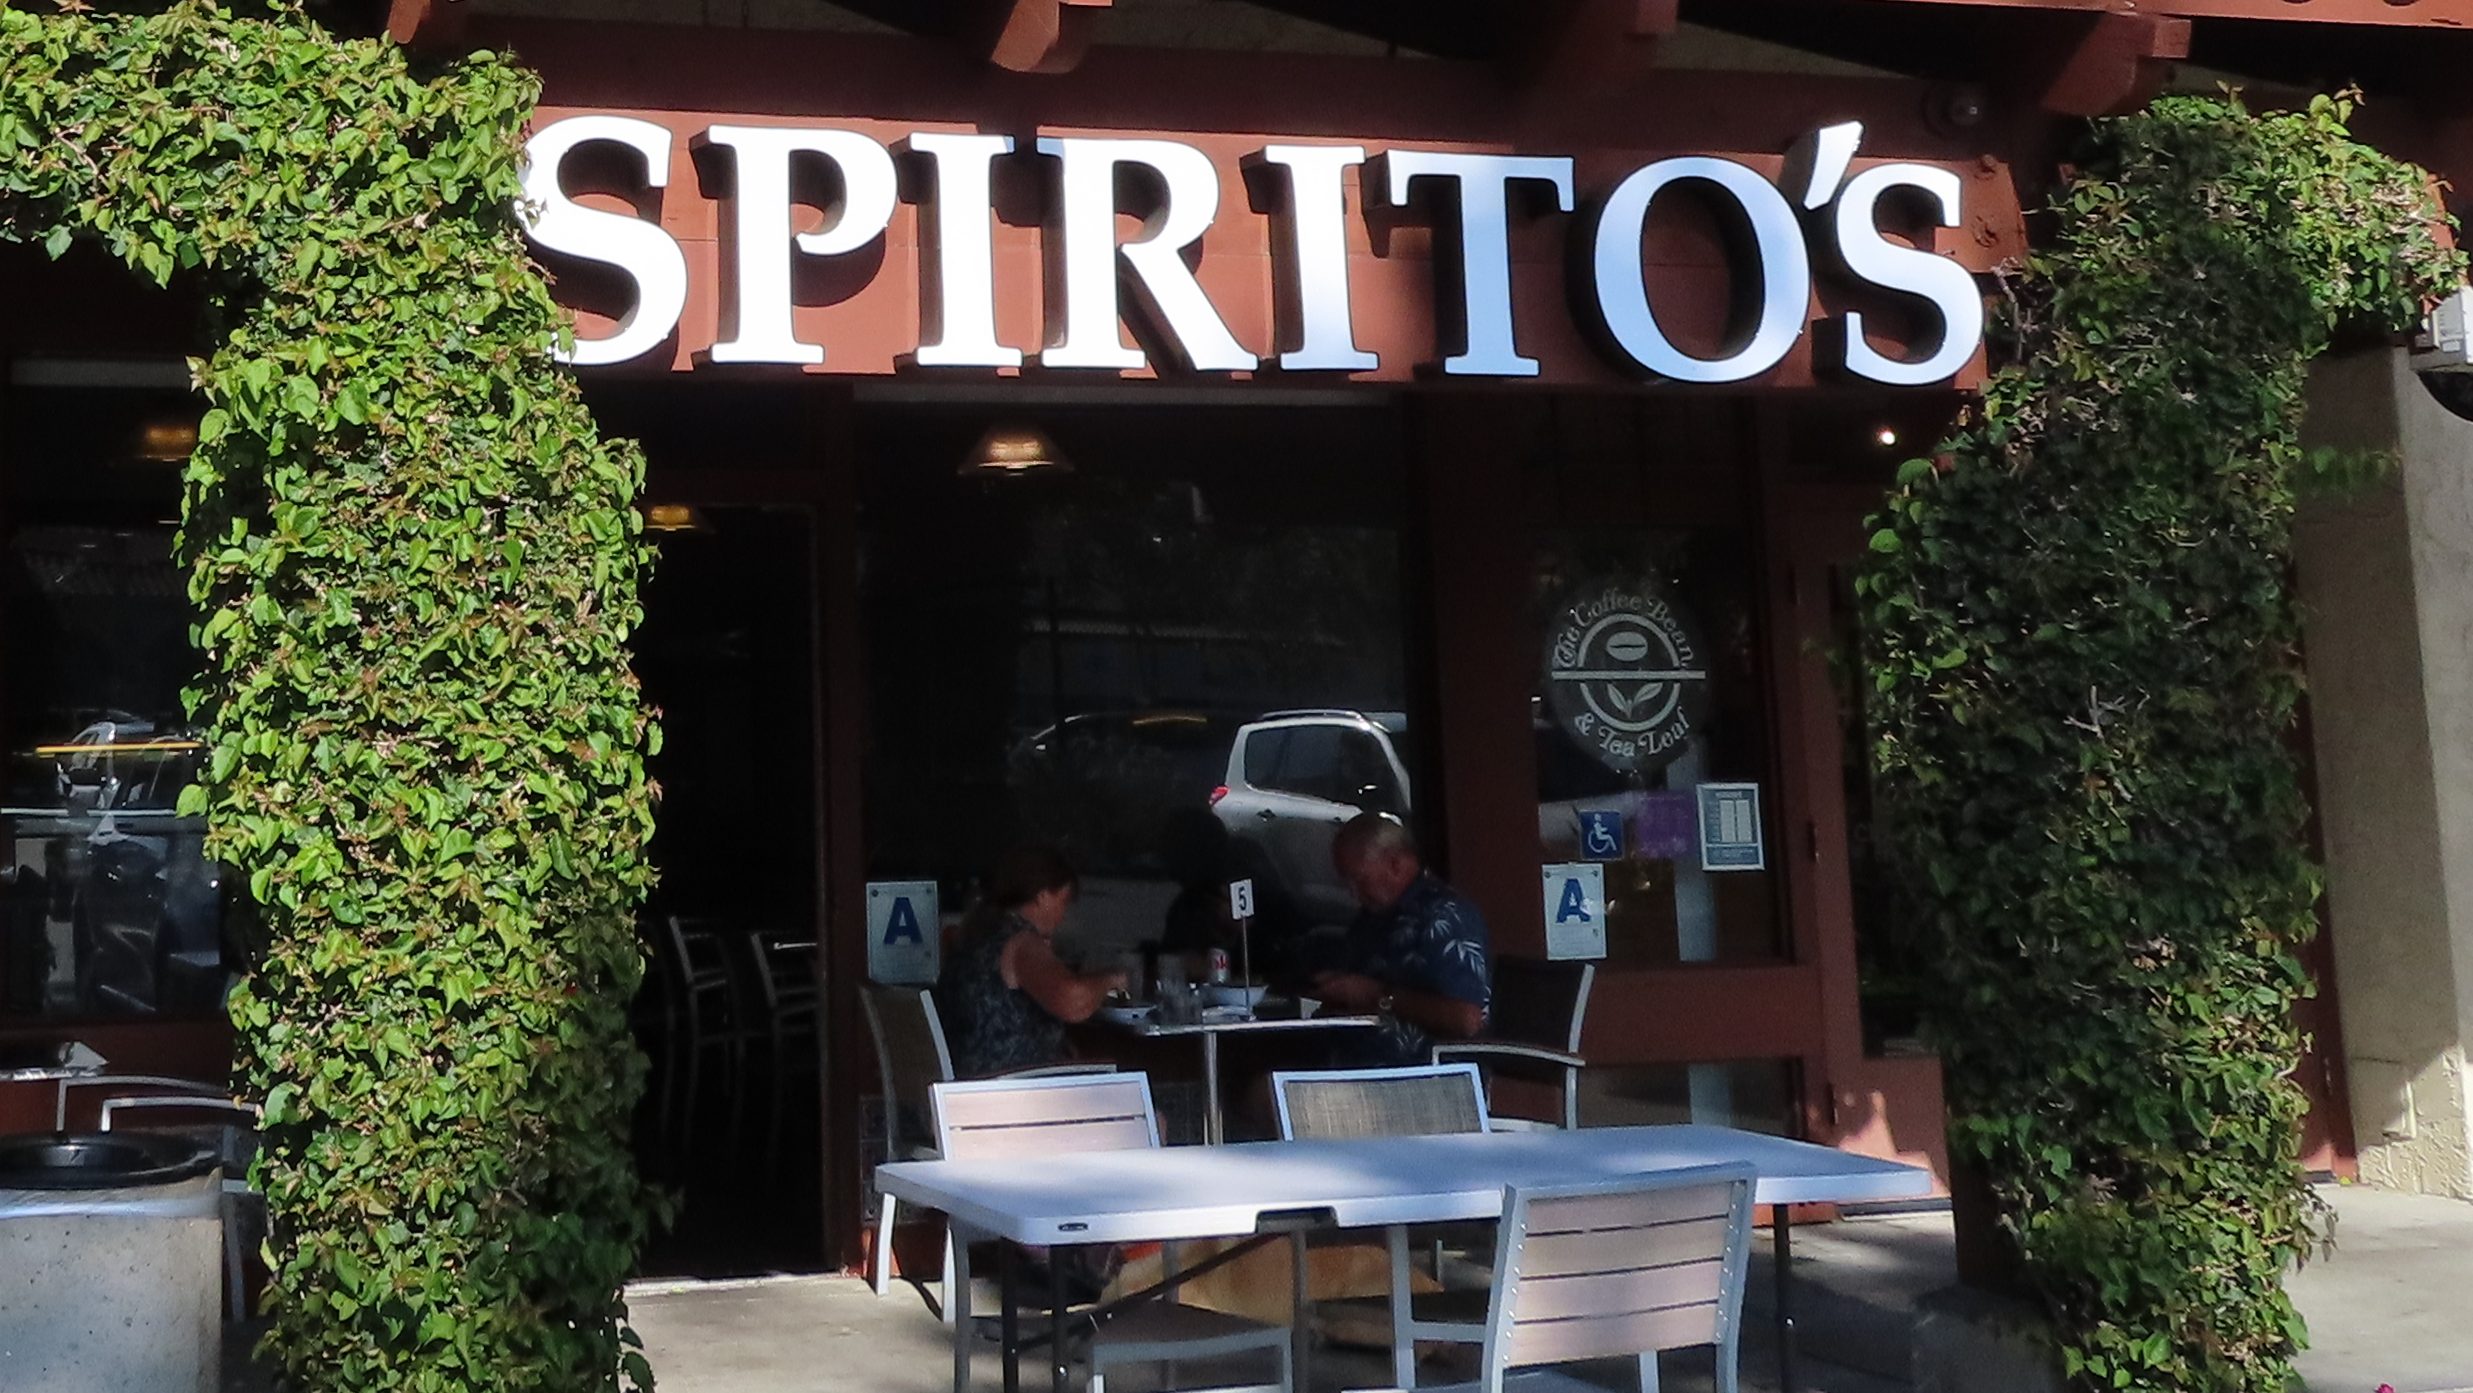 There is a sign outside the restaurant that reads in white capital letters Spirito's. There are tables outside the restaurant near the entrance and the facade is wooden with a red brick on top.